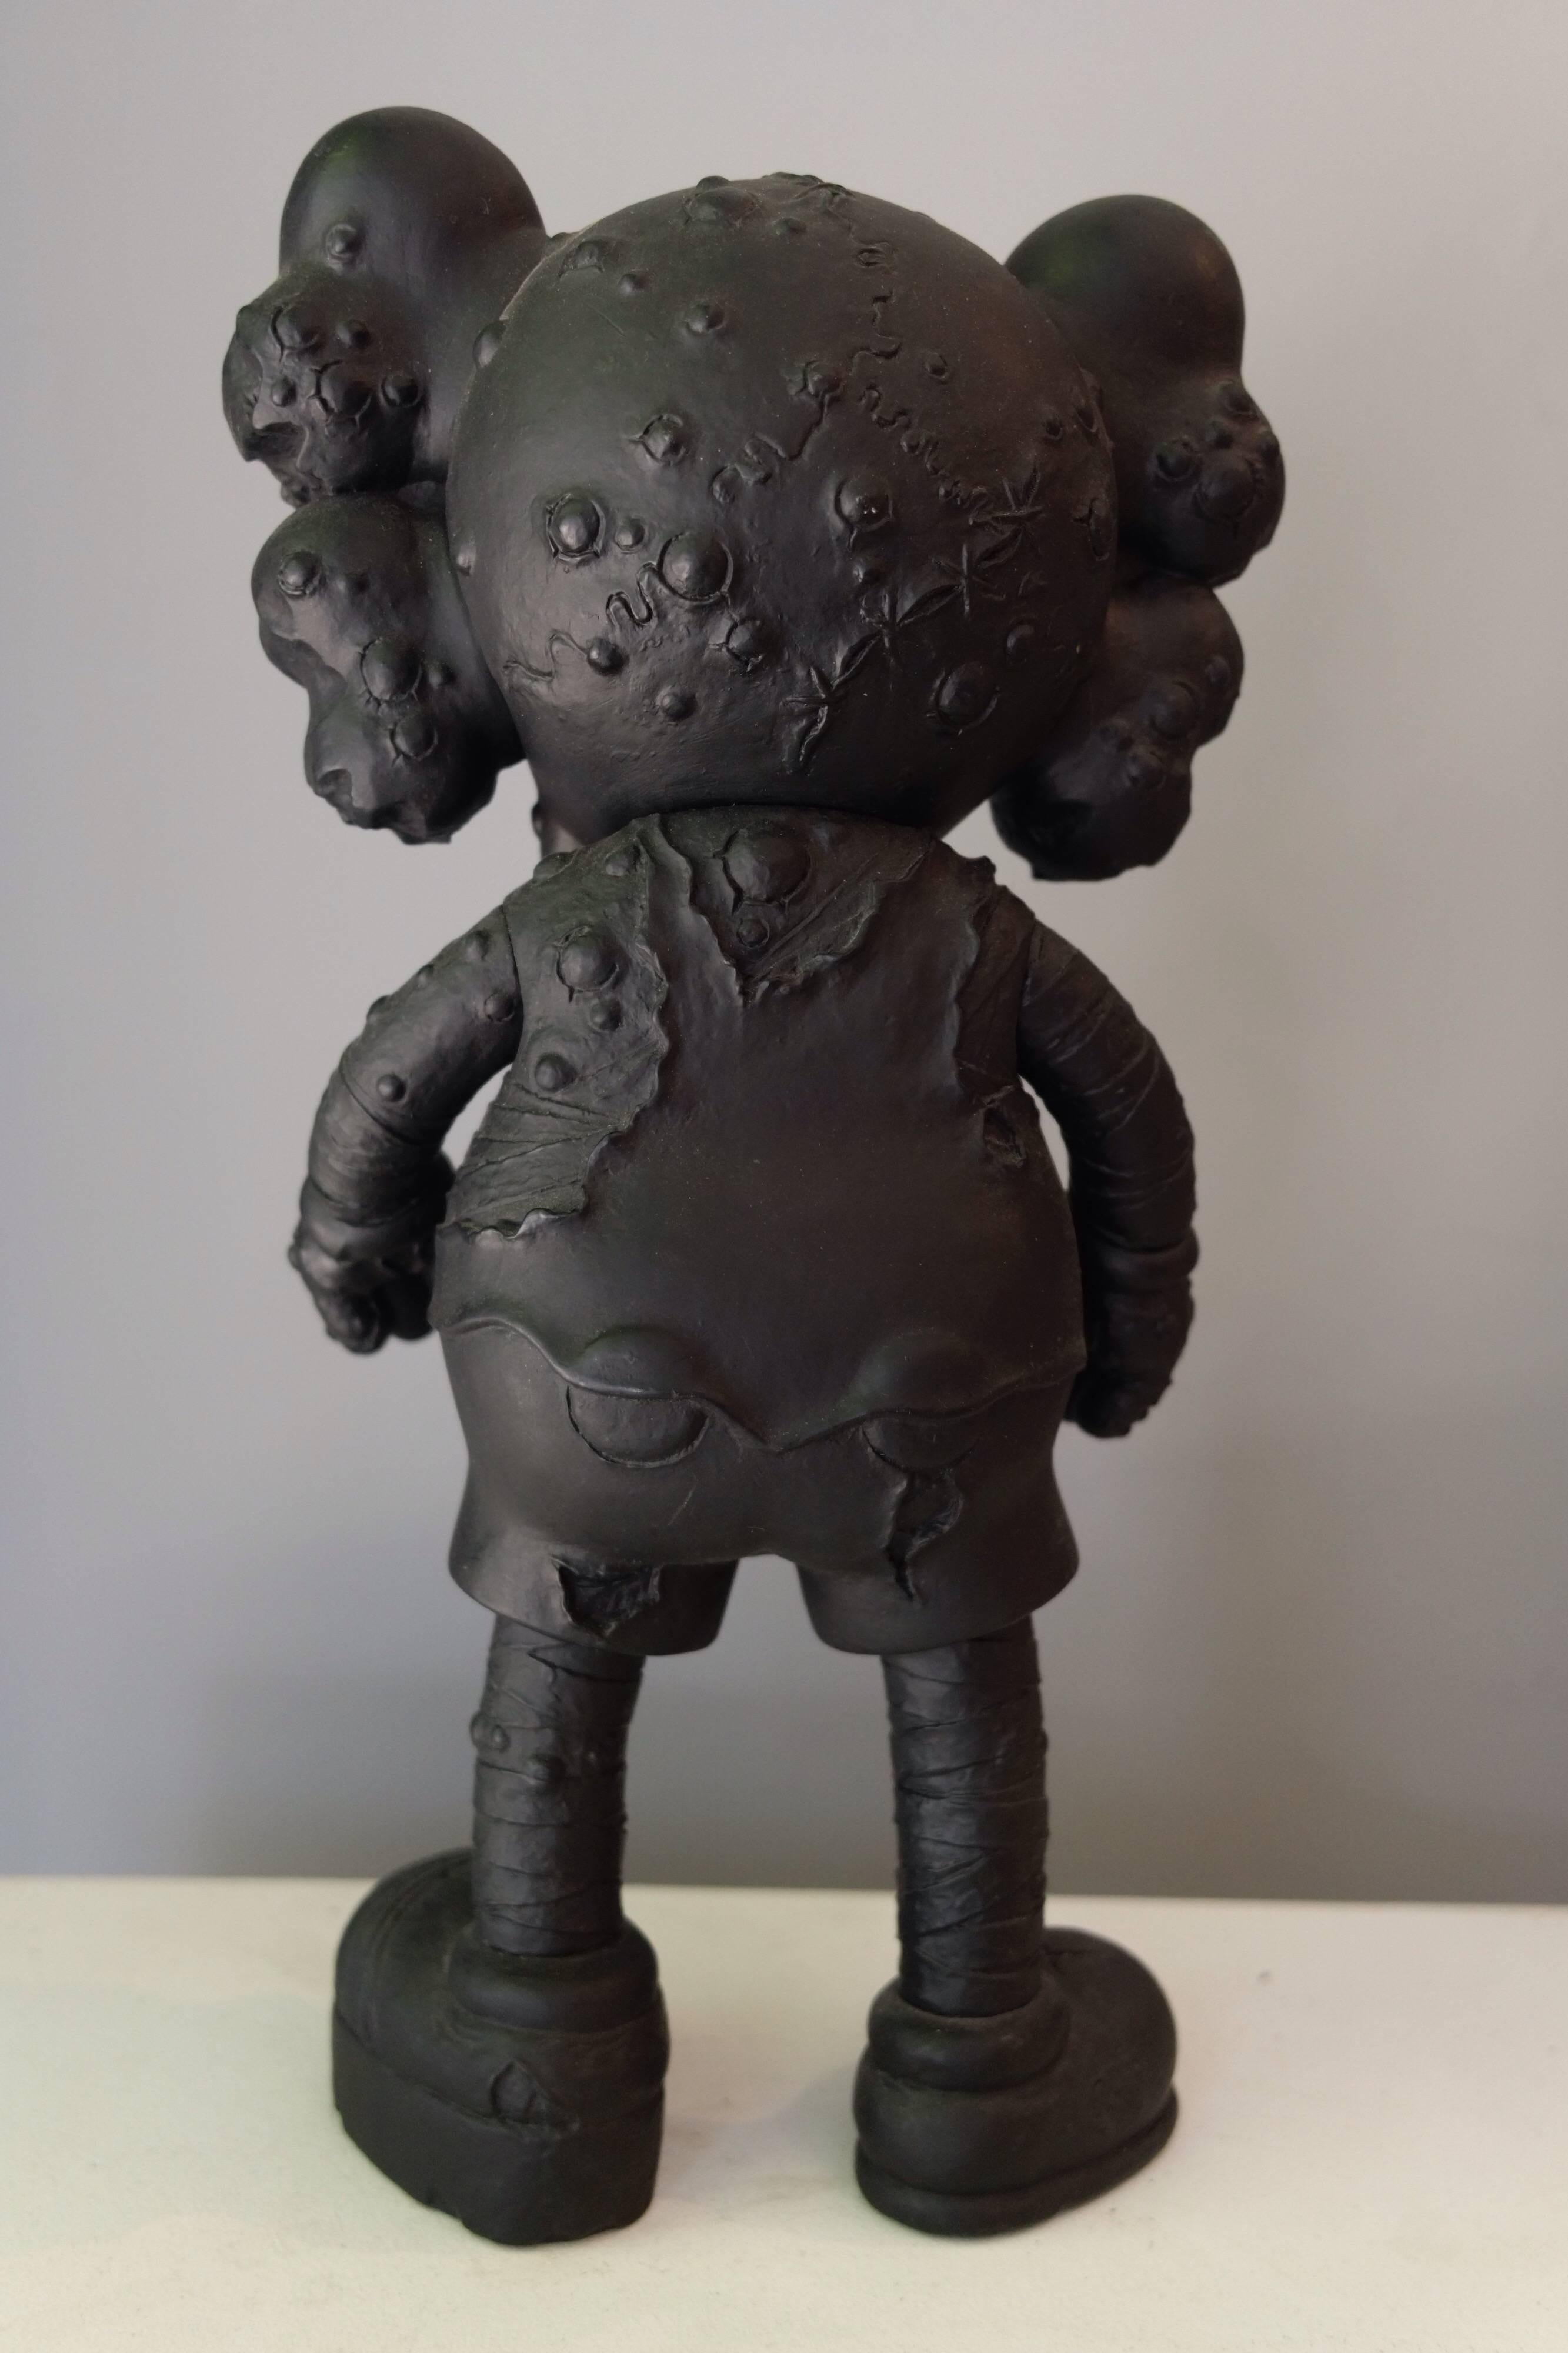 Kaws, Pushead version companion, 2005. 
Original fake. 

Black. 
Painted cast vinyl. 
From an edition of 500. 
In its original packaging / box. 
Produced and manufactured Medicom Toy Corporation, China. 

About the artist: 
Born Brian Donnelly in